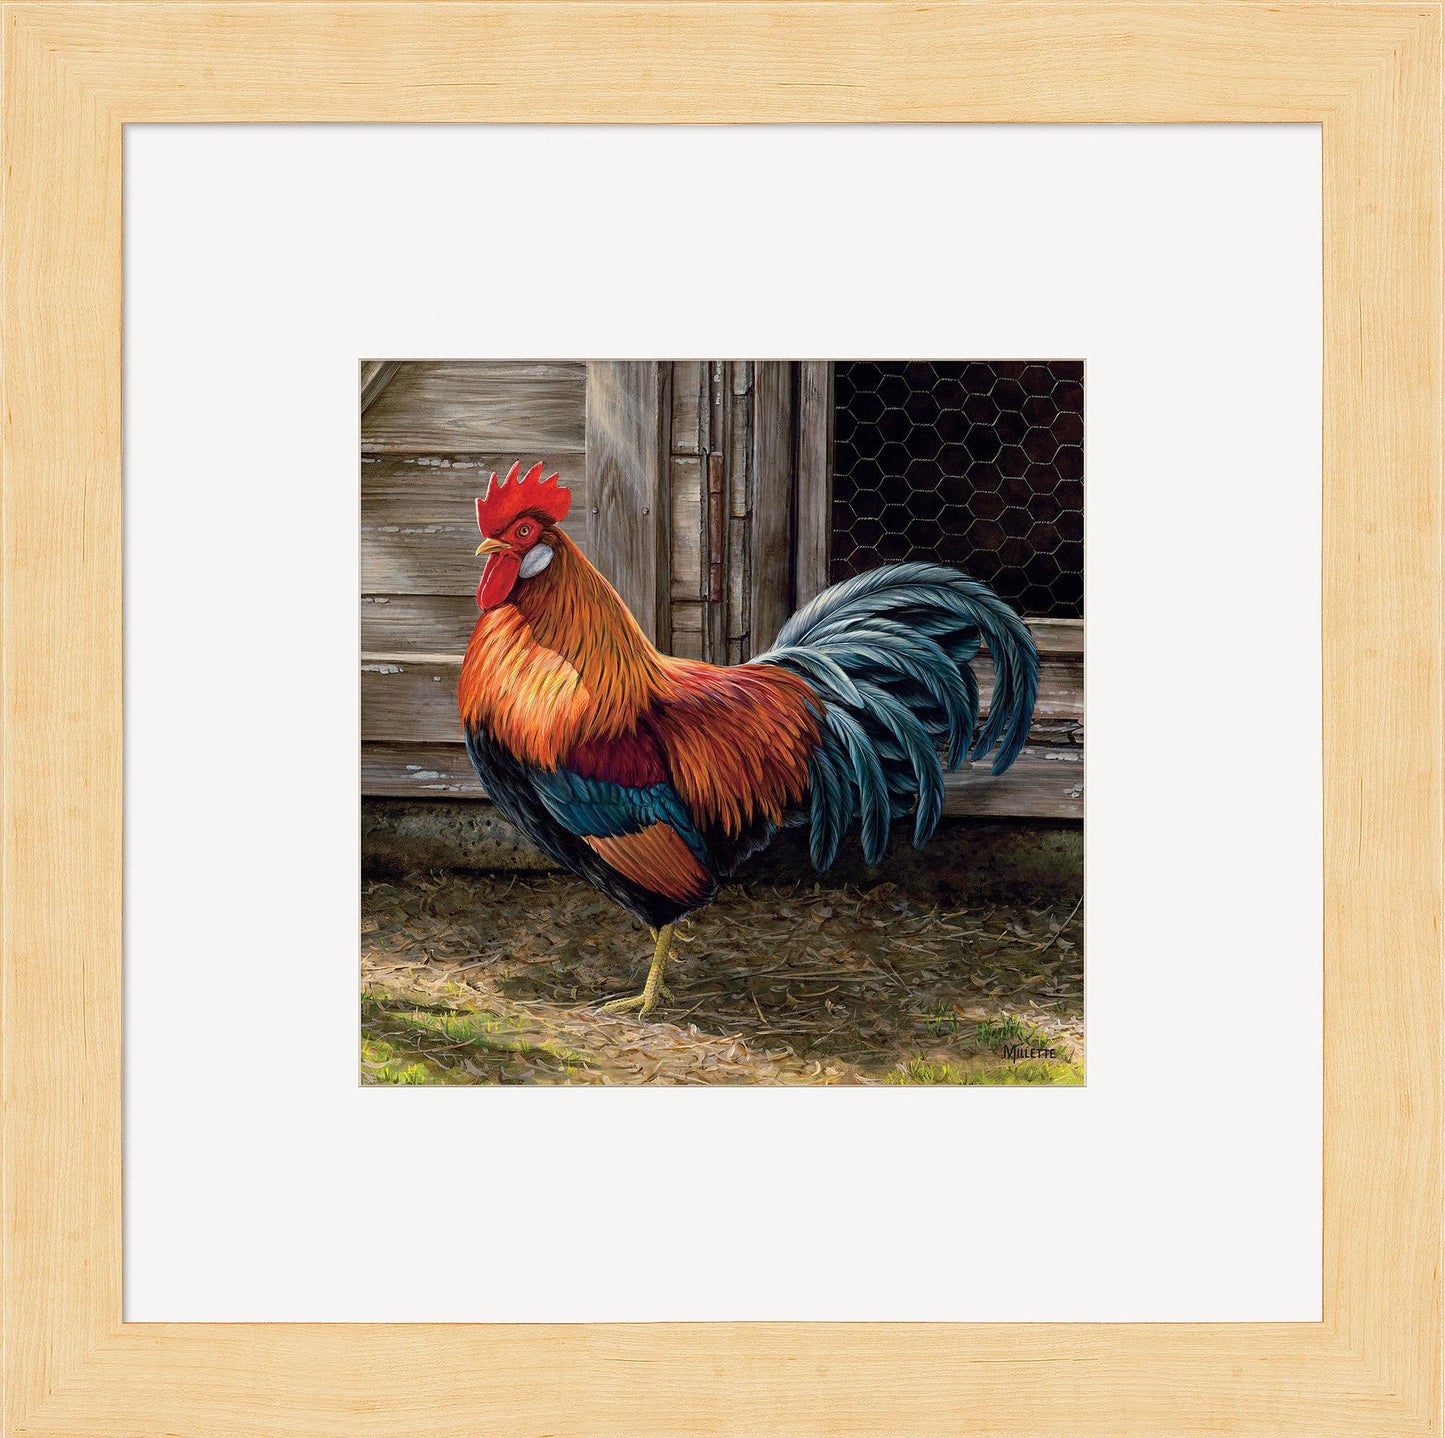 Leghorn Rooster Contempo Square - Wild Wings